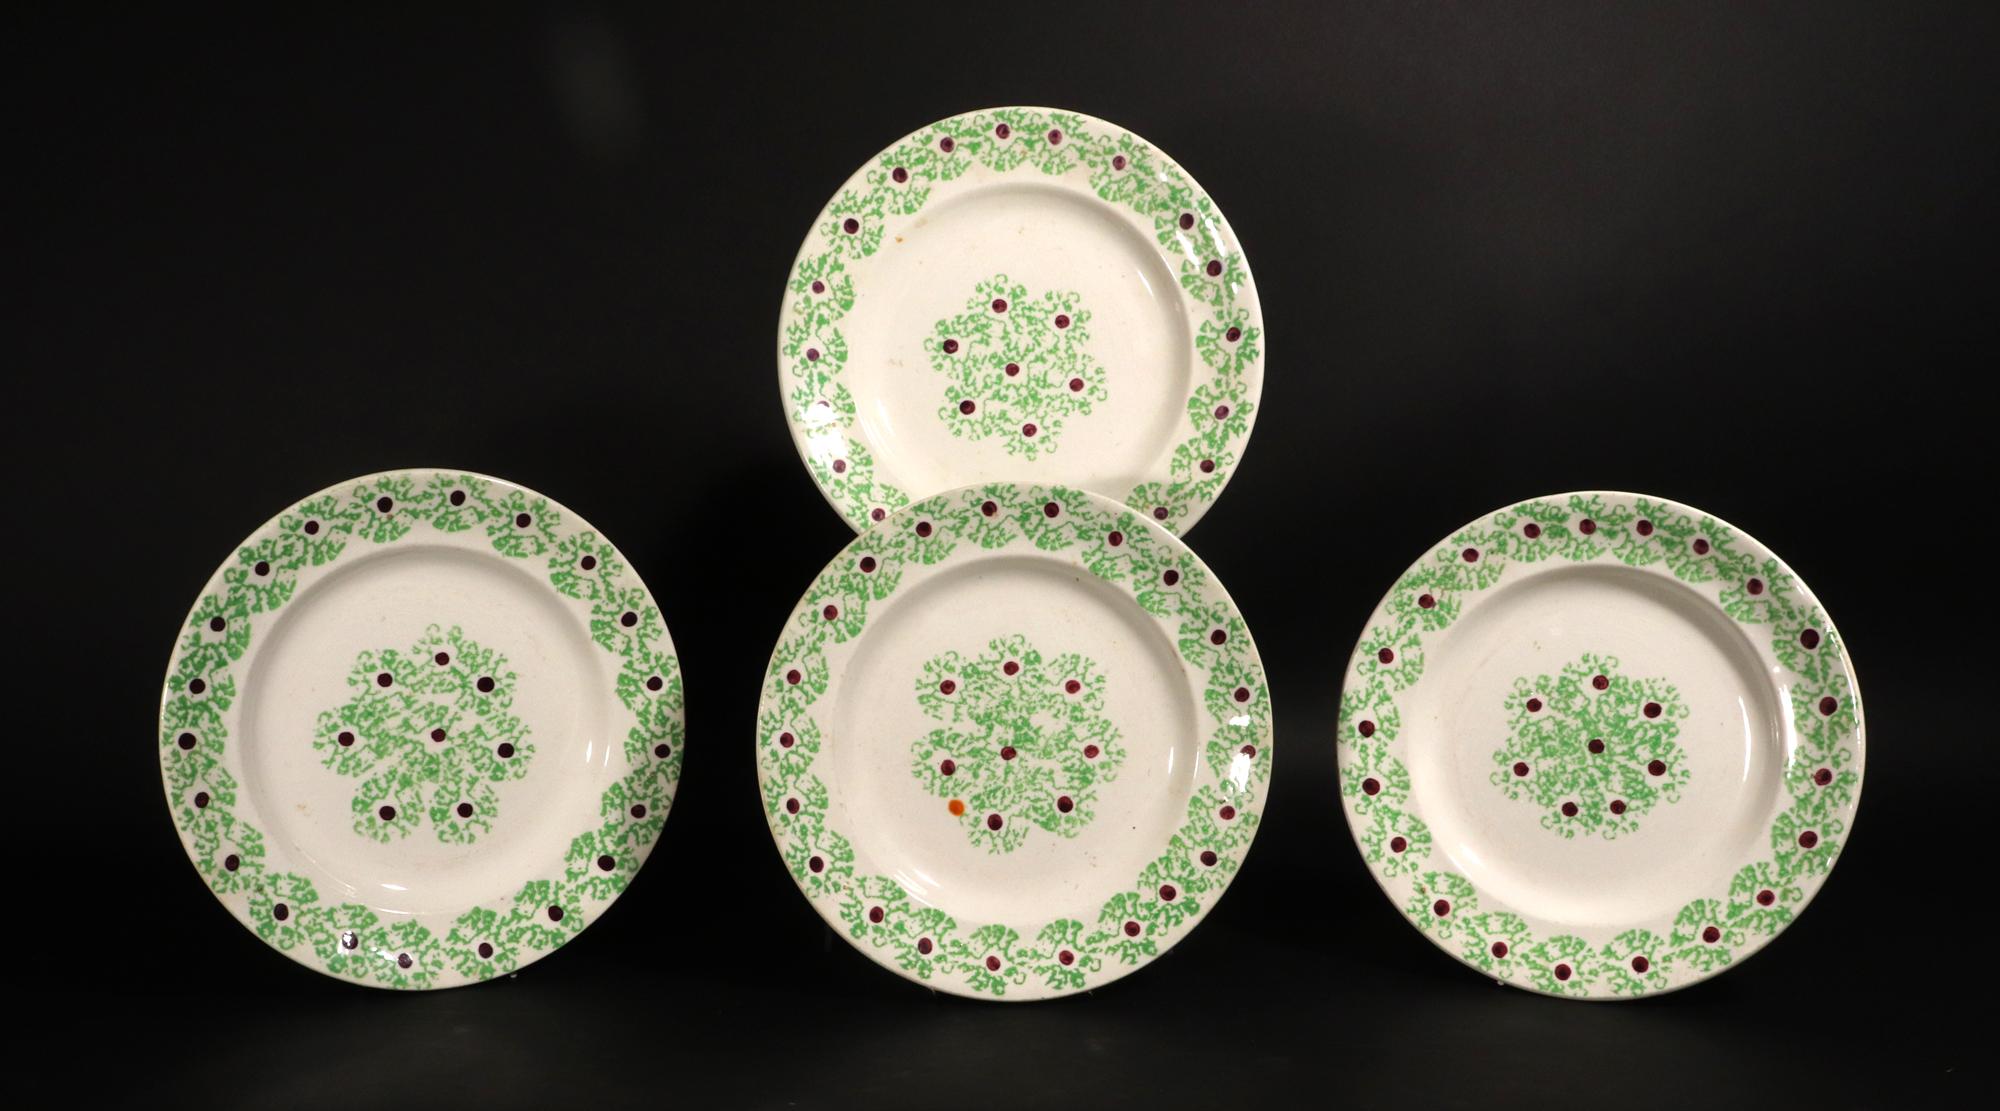 English Pottery Green Sponged Spatterware Set of Four Plates,
1st Half of 19th Century

The Sponged Spatterware plates are attractively decorated with a green seaweed border with a brown dot in the center of each stamp.  The design is found in the